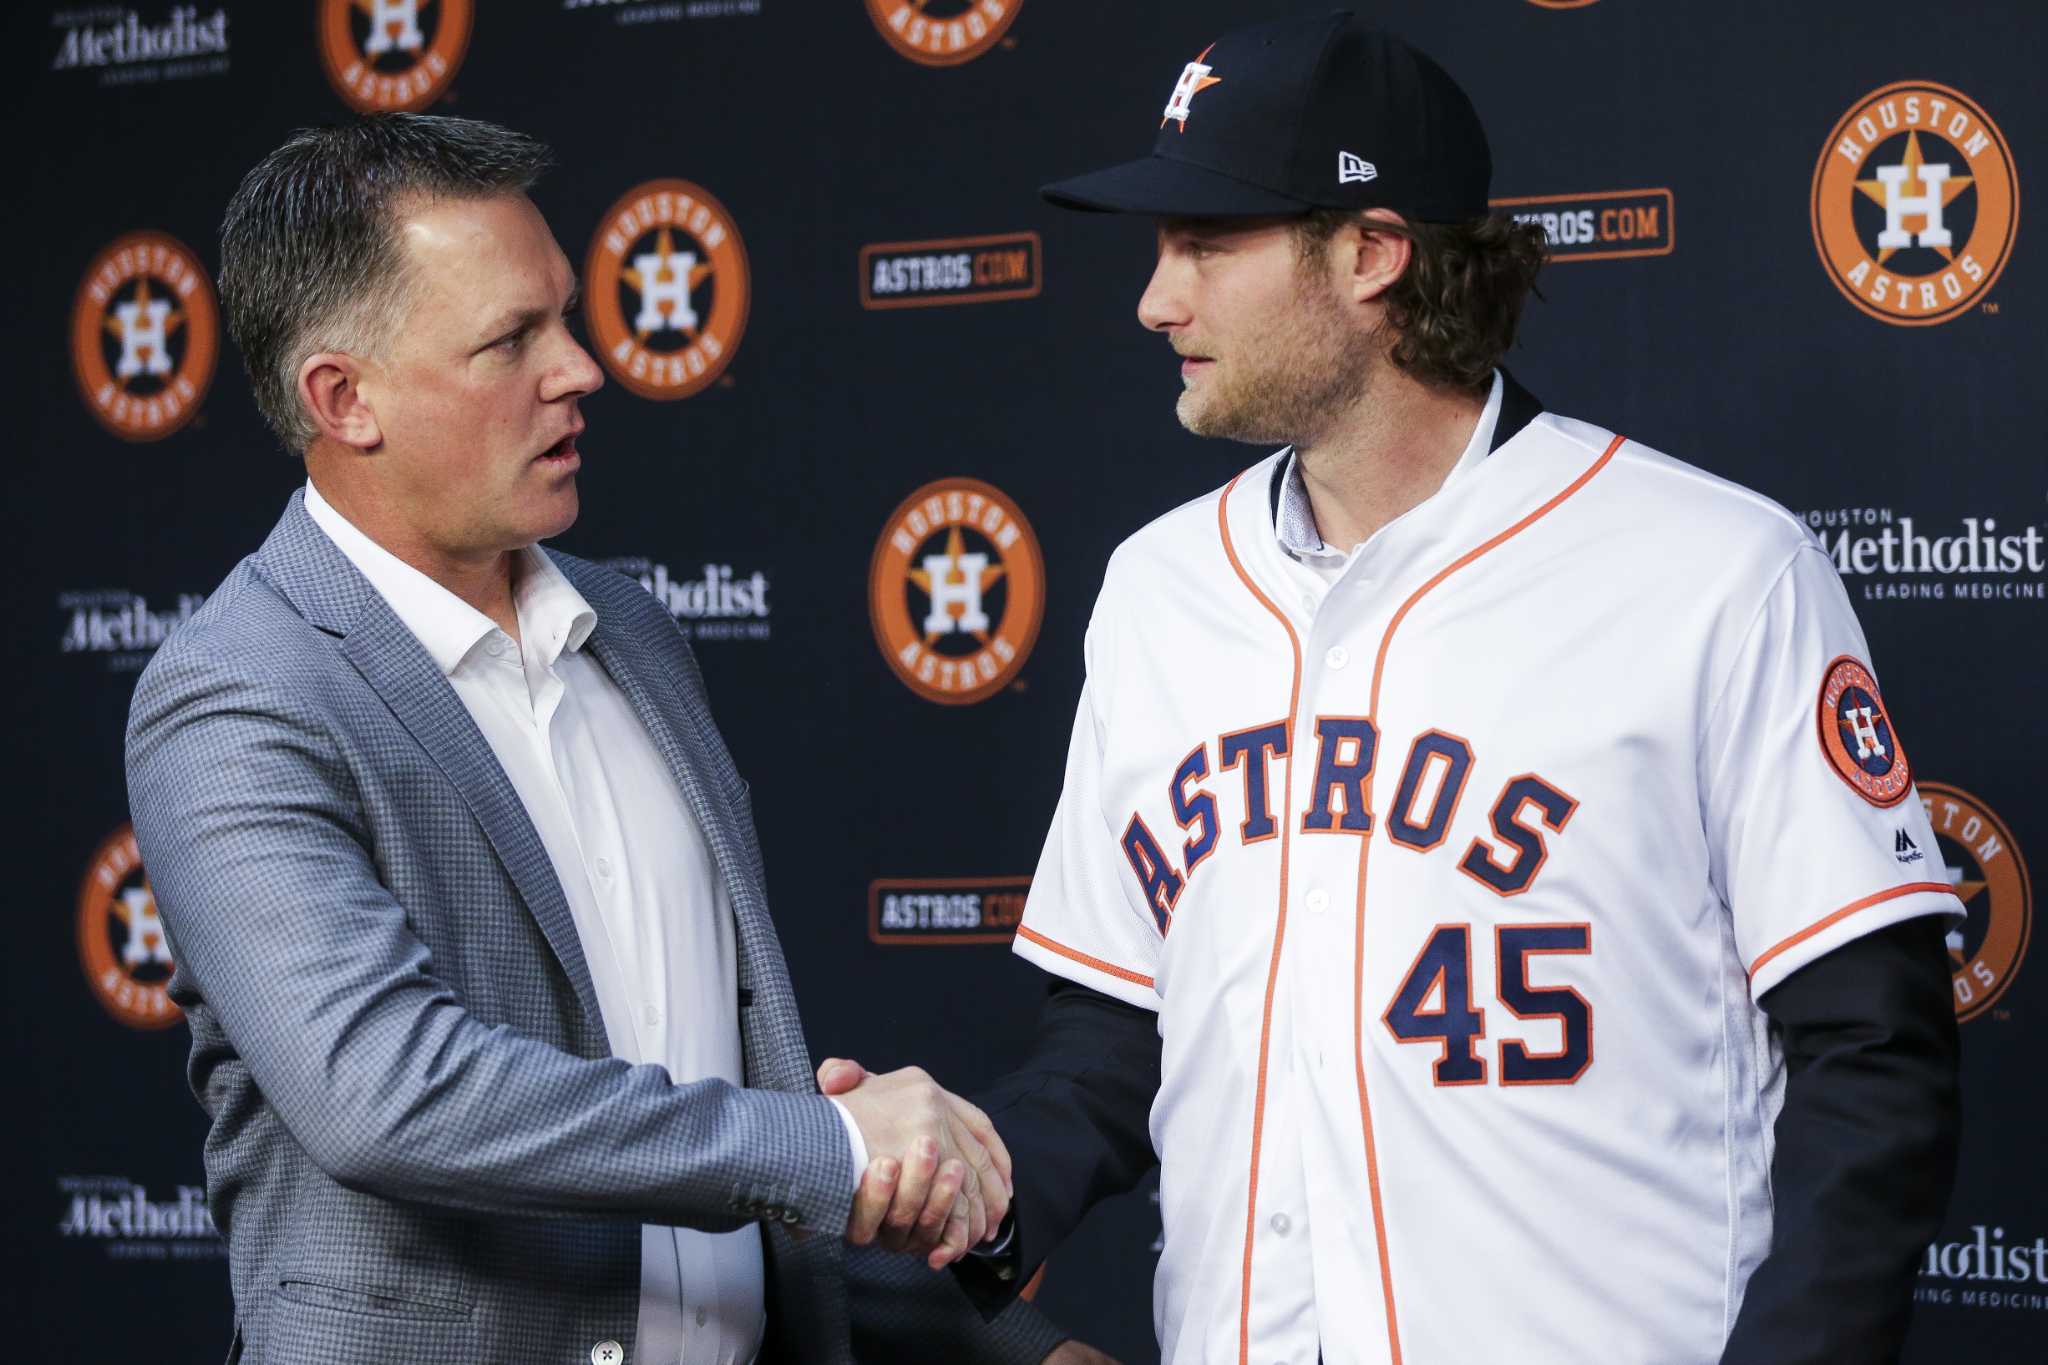 Astros pitcher Gerrit Cole introductory news conference